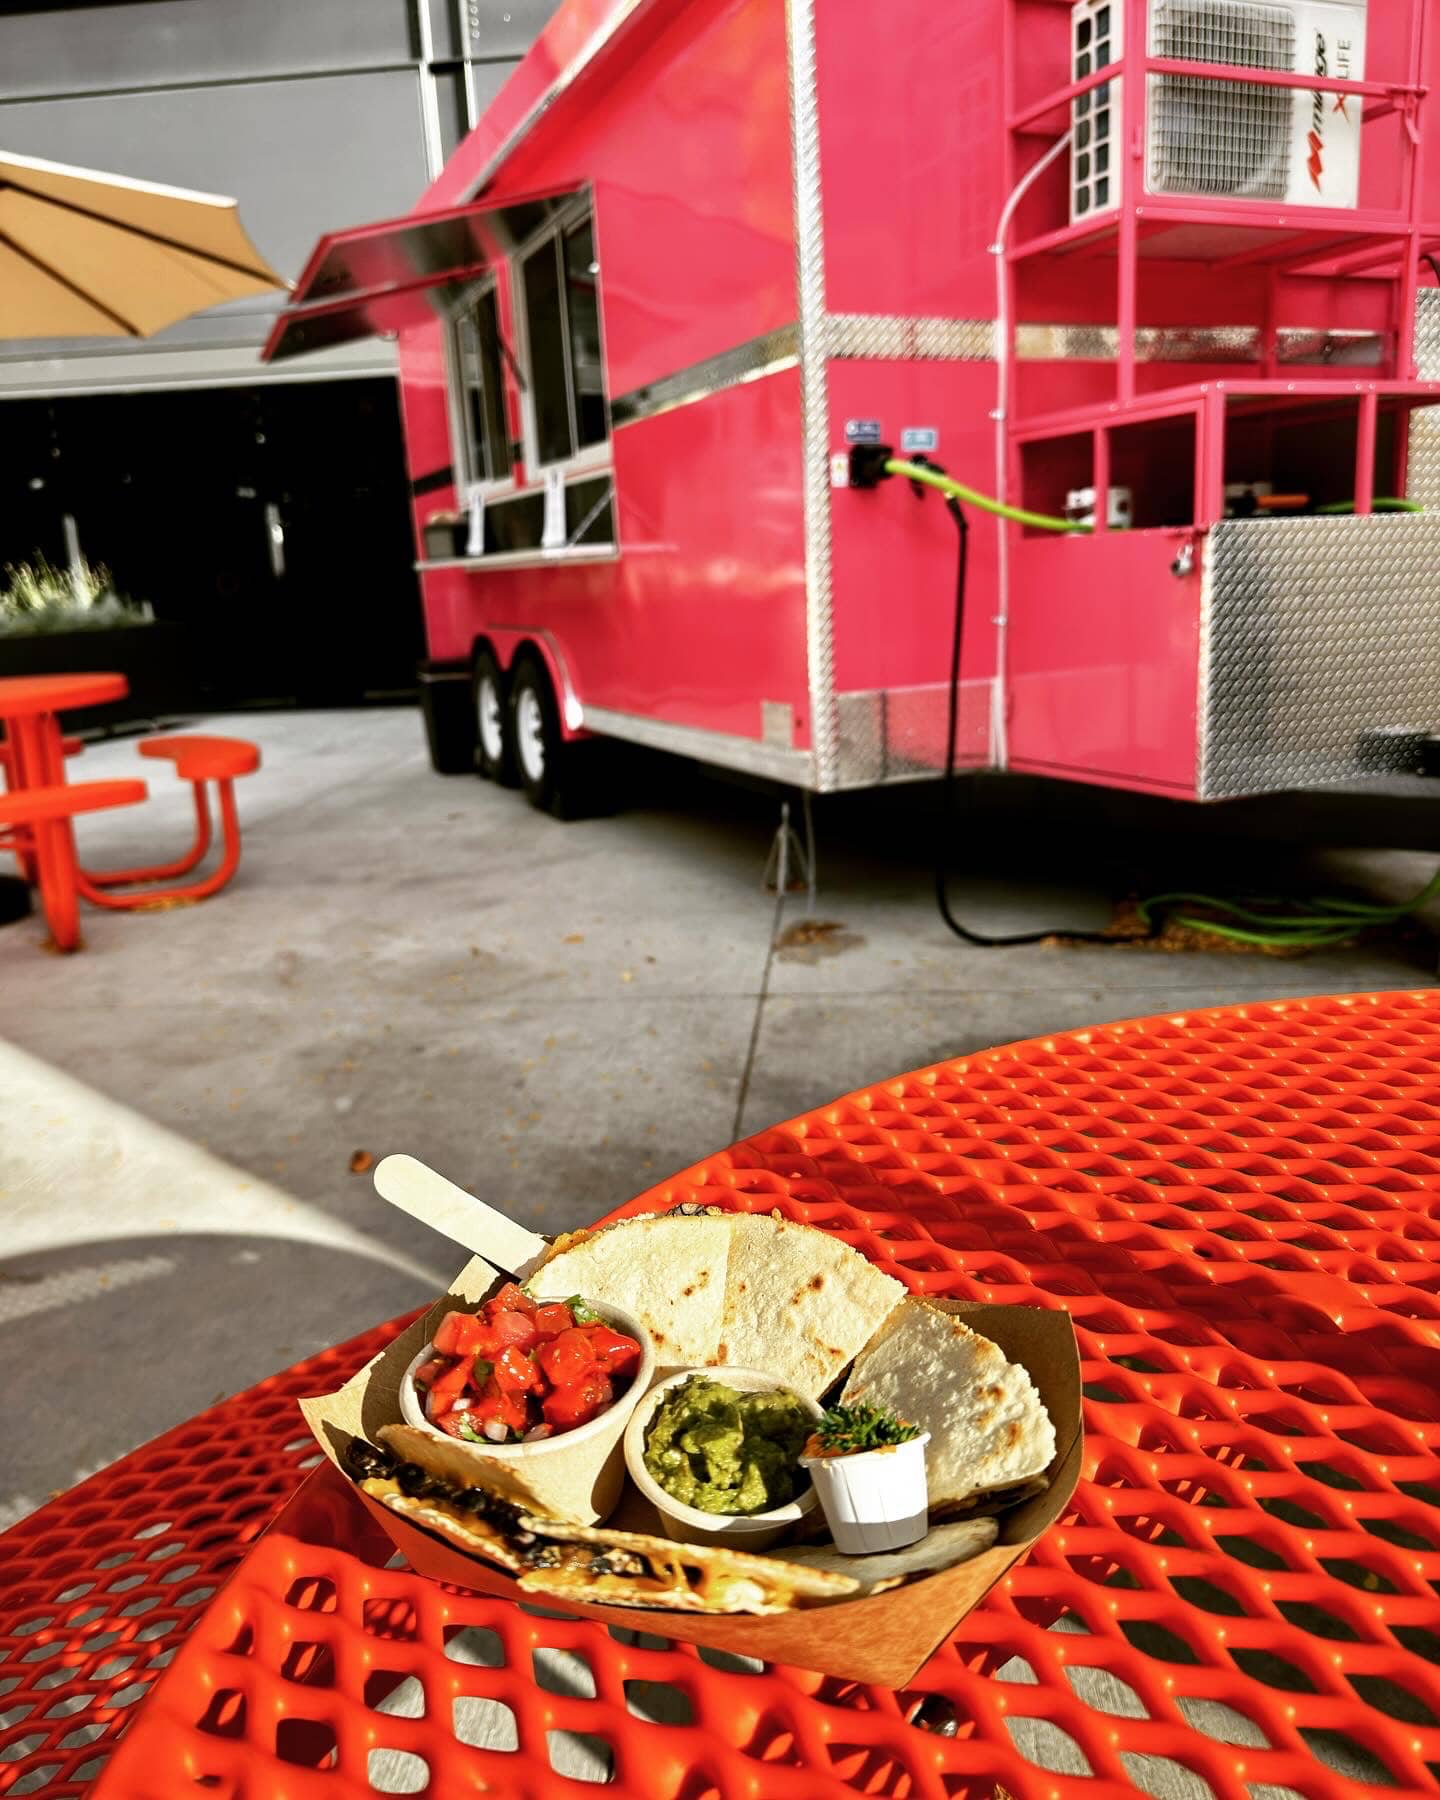 luv tempeh quesadilla on a red table with the bunny chow trailer in the background.